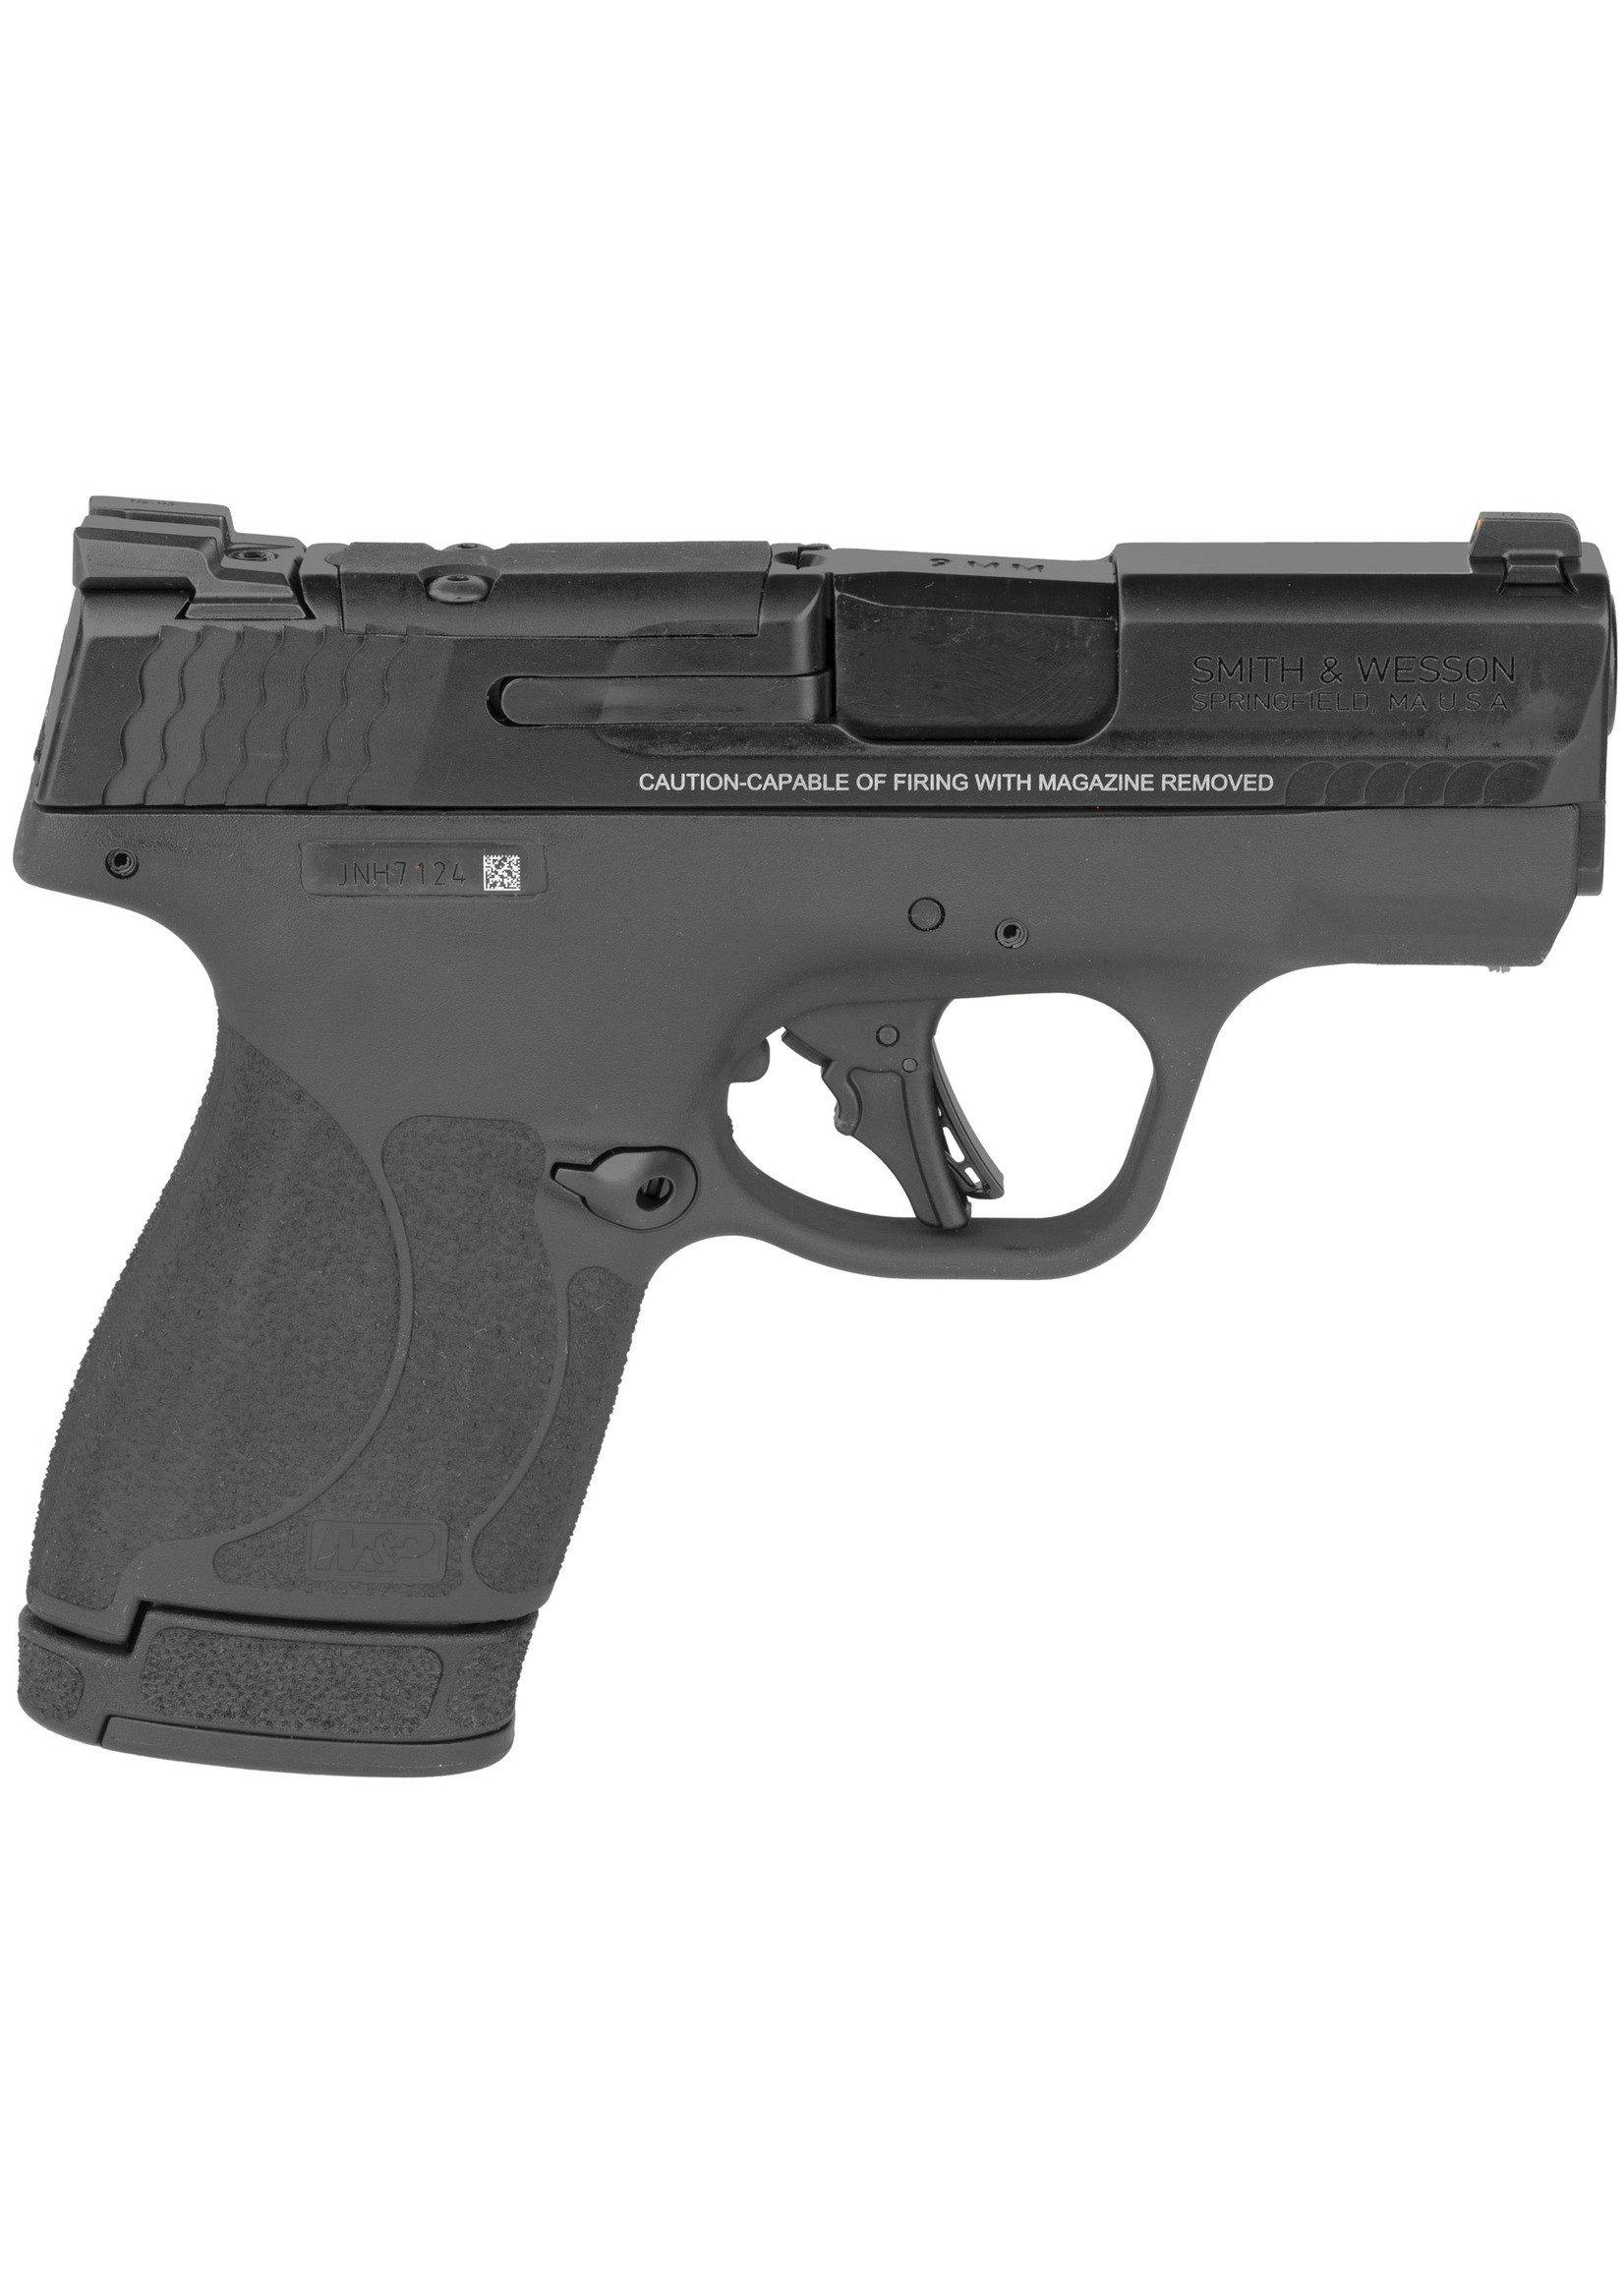 Smith and Wesson (S&W) Smith & Wesson, M&P9 Shield Plus OR, Striker Fired, Semi-automatic, Polymer Frame Pistol, Micro Compact, 9MM, 3.1" Barrel, Armornite Finish, Black, Tritium Night Sights, Optics Ready, No Manual Safety, 13 Rounds, 2 Magazines, (1)-13 Rounds an